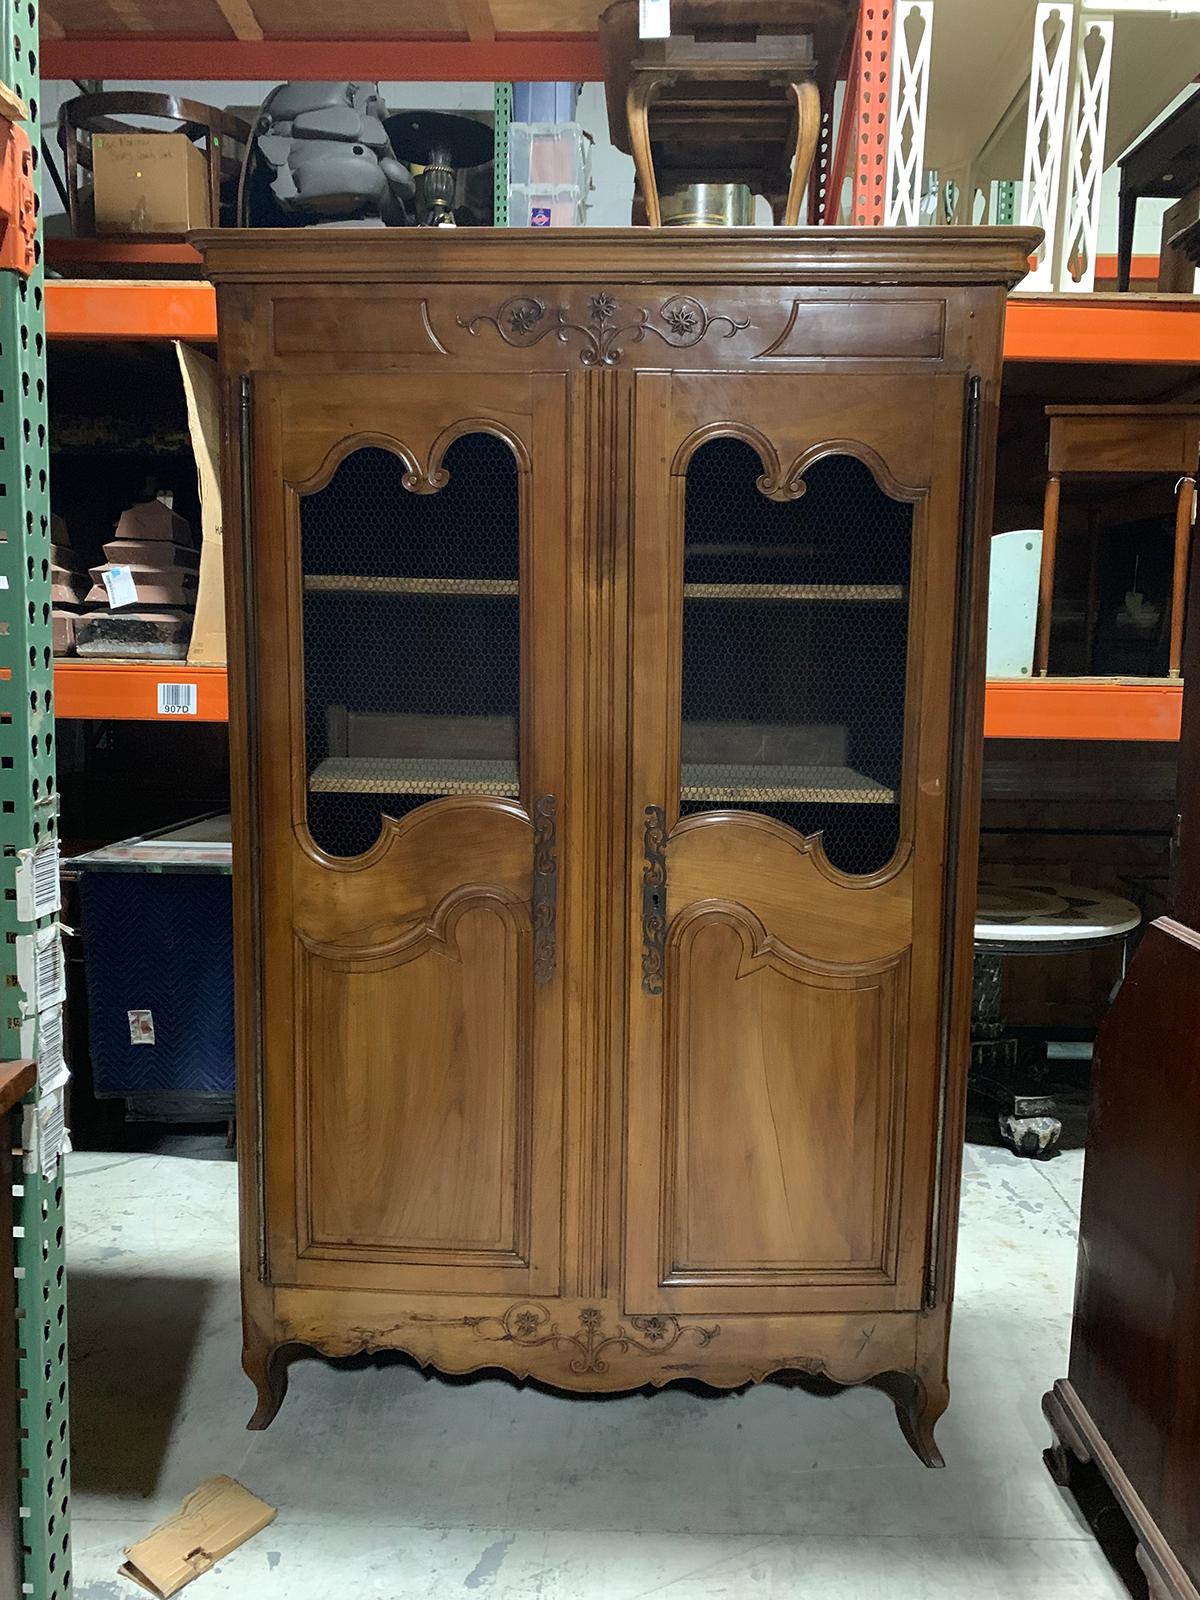 19th century fruitwood armoire with wire doors
wonderful condition.